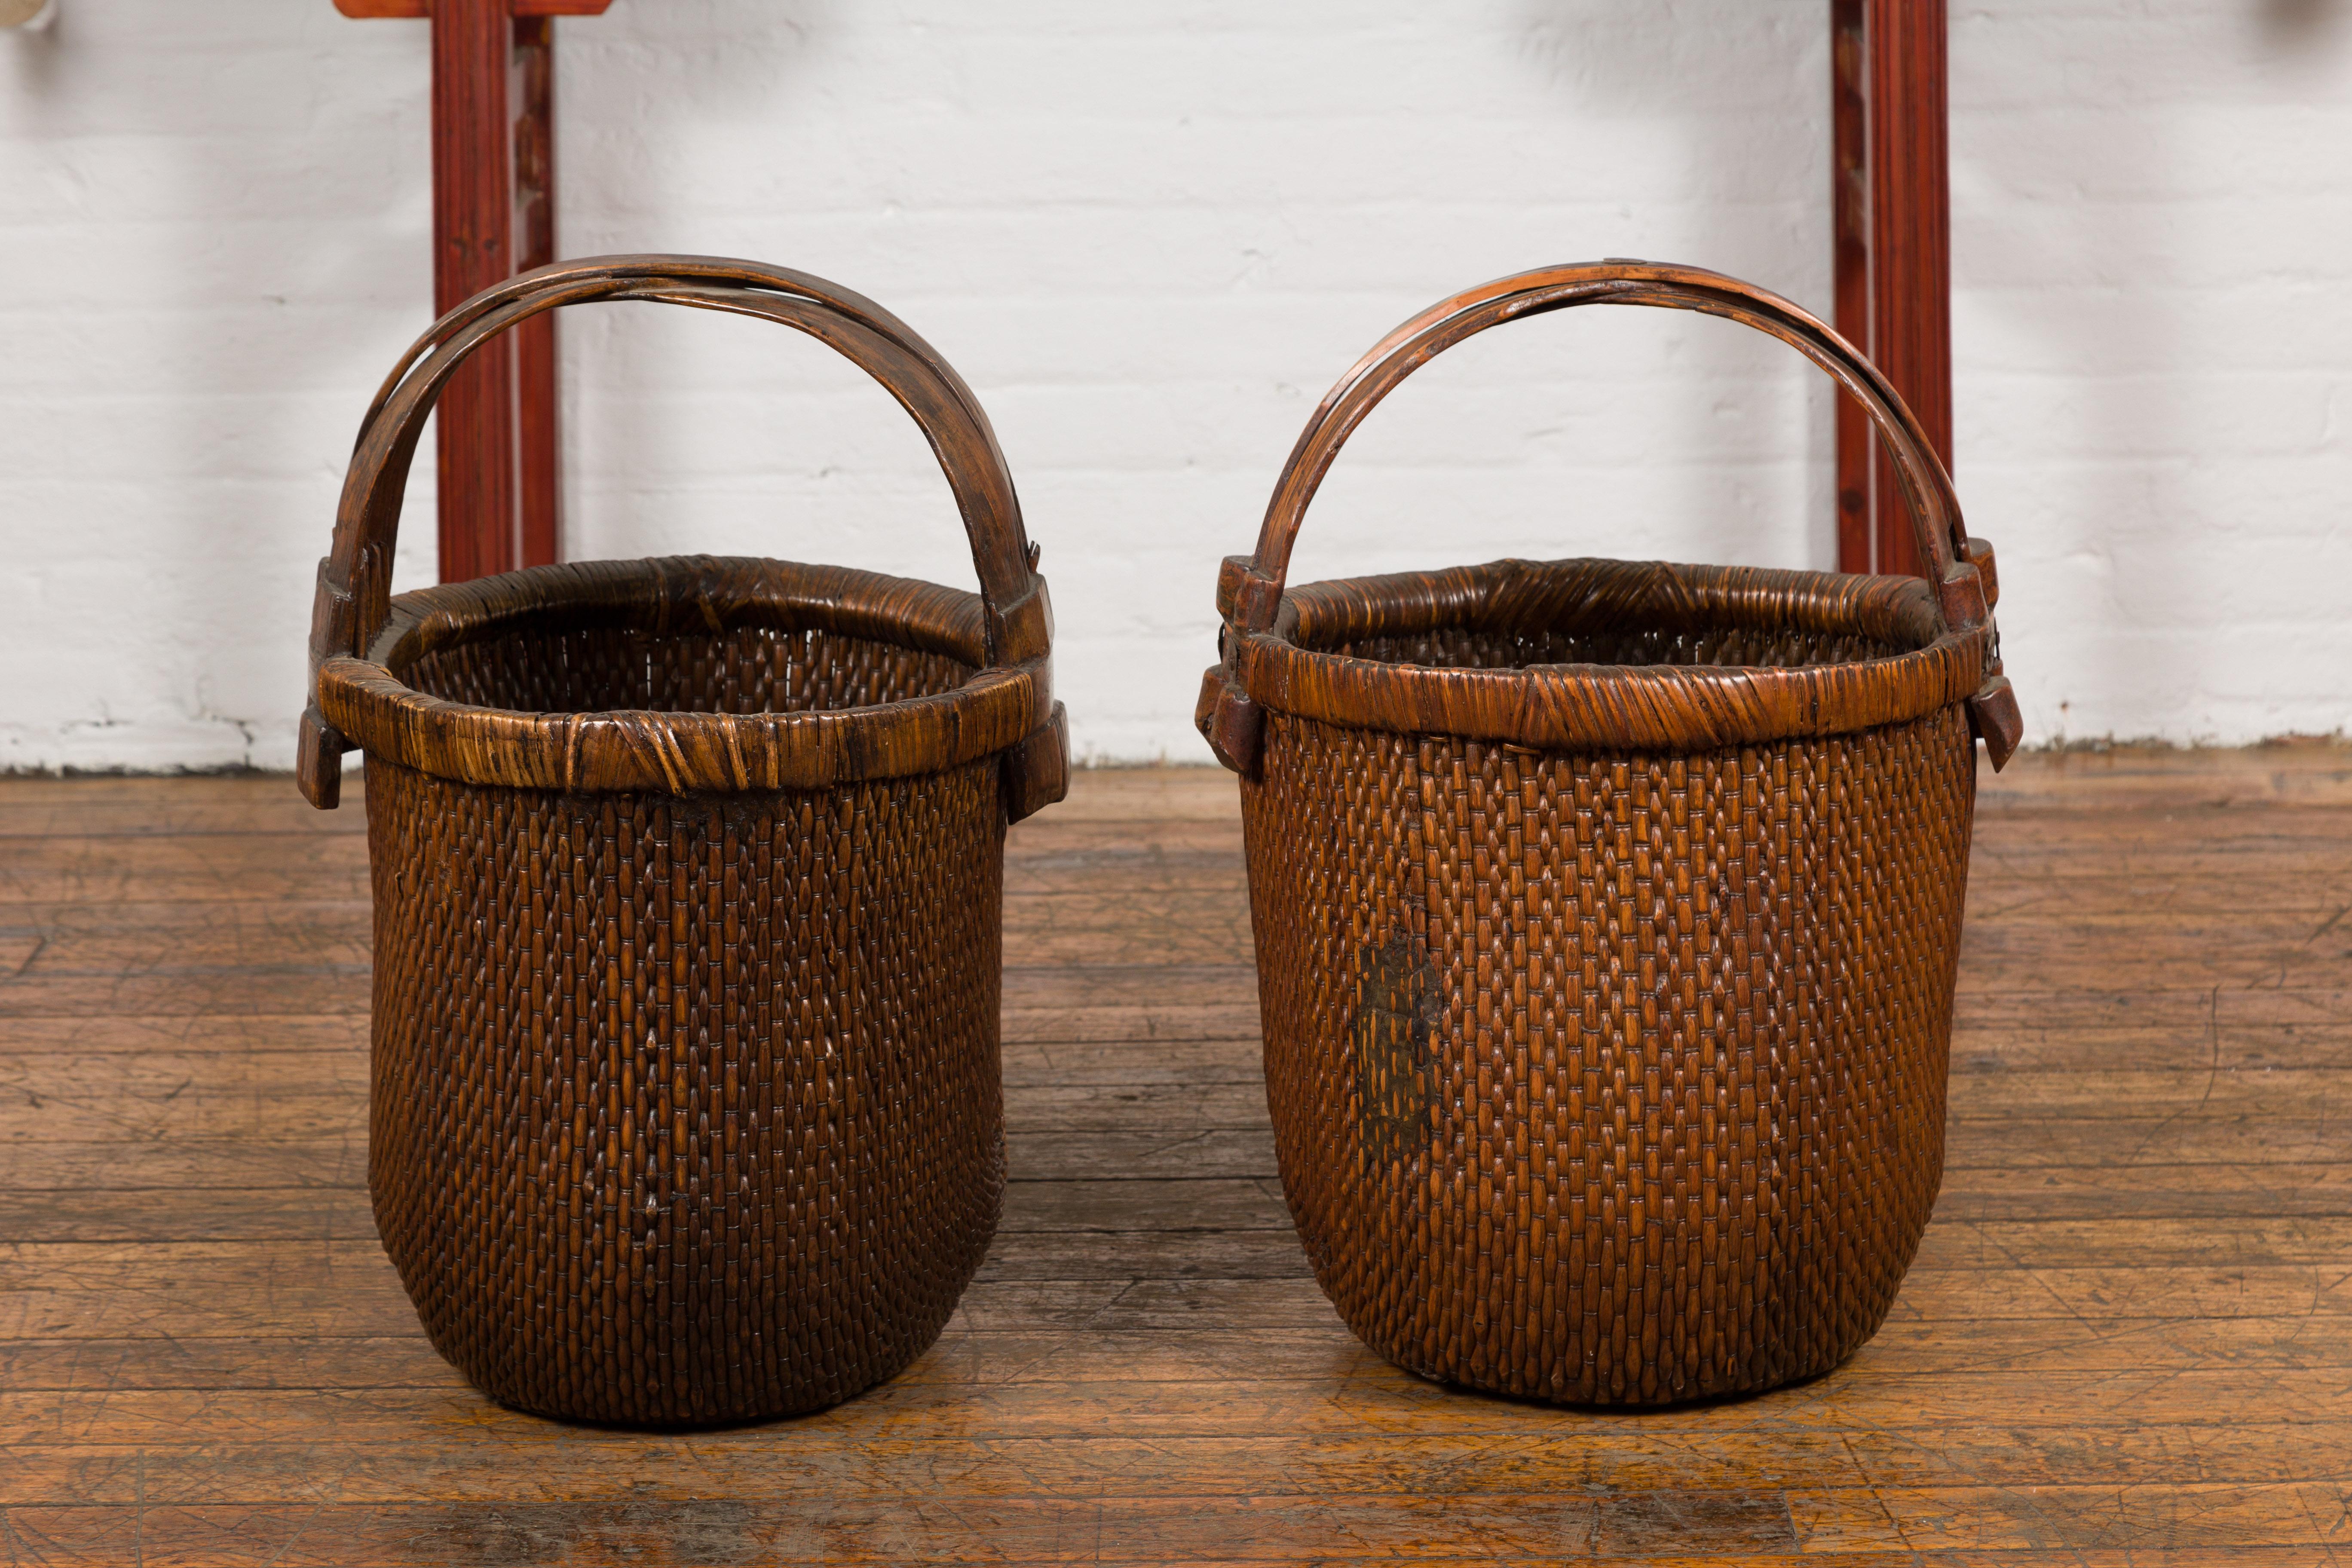 Rustic Chinese Antique Grain Baskets, Sold Each For Sale